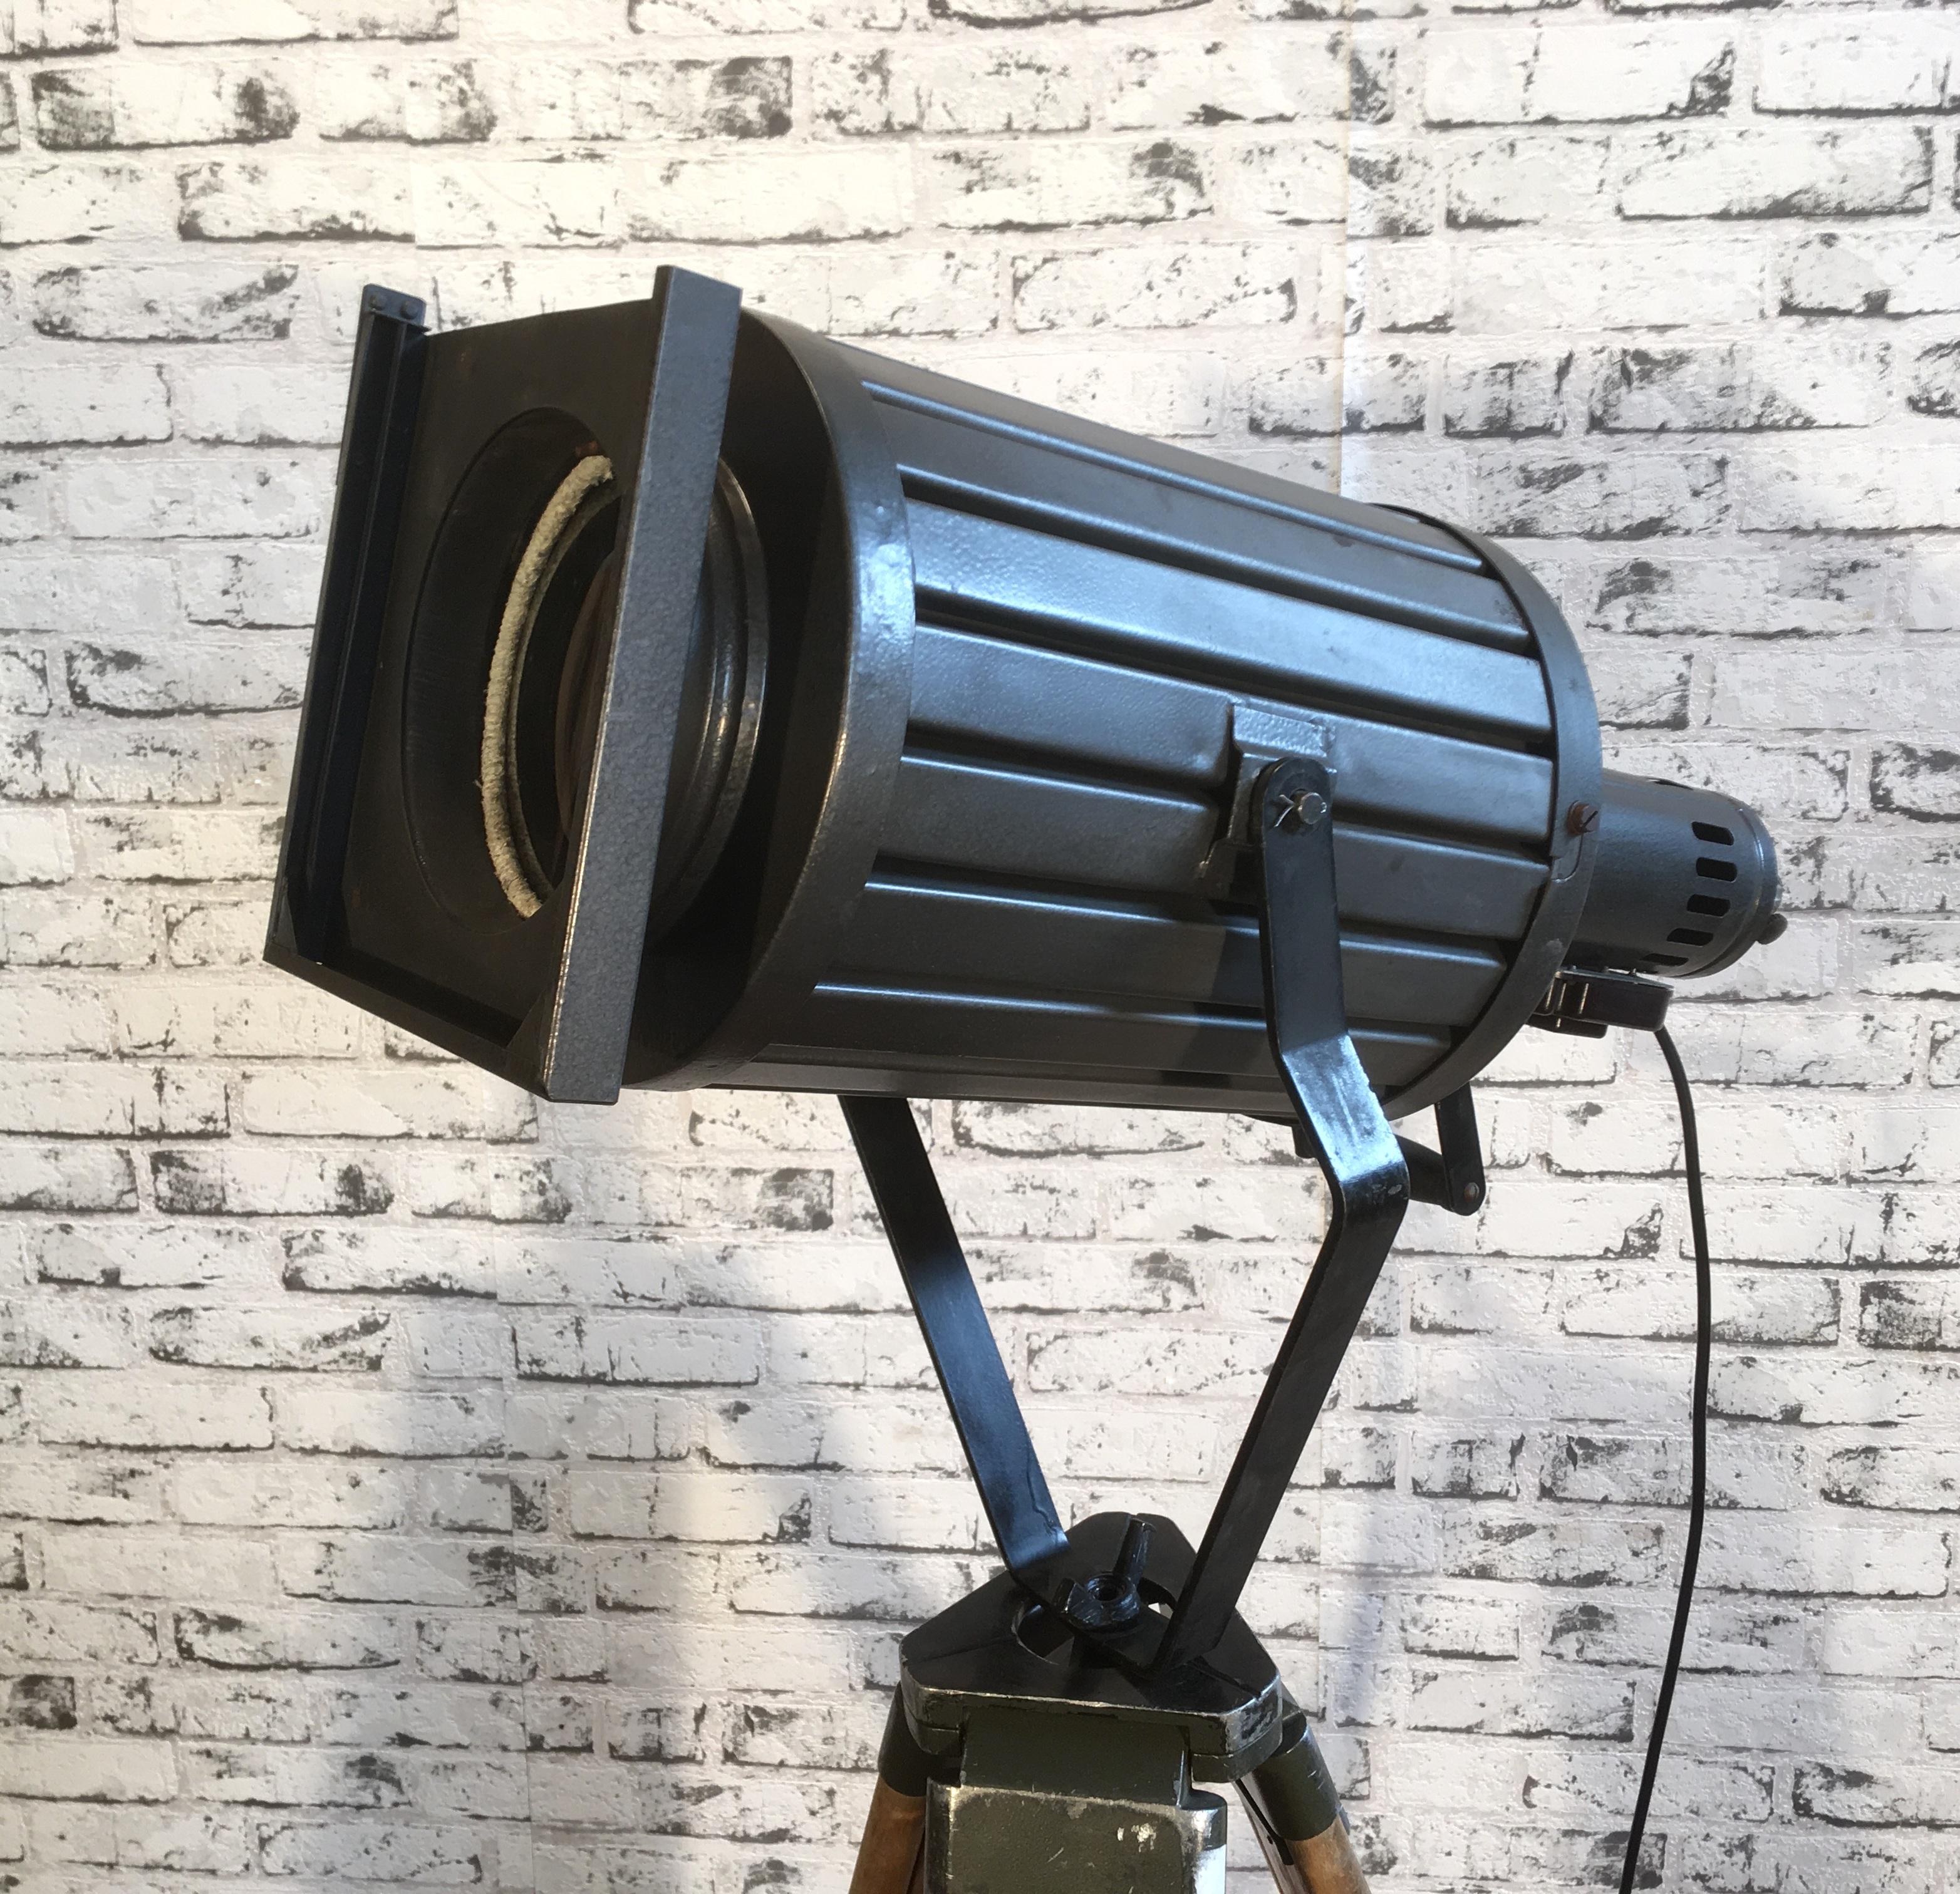 - Vintage theatre spotlight on wooden tripod made during the 1960s
- Adjustable height and angle
- Black metal body
- Clear magnifying glass
- Dimensions of the lamp: 21 x 21 cm, height: 50 cm, depth: 71 cm
- Minimum total height: 145 cm
-